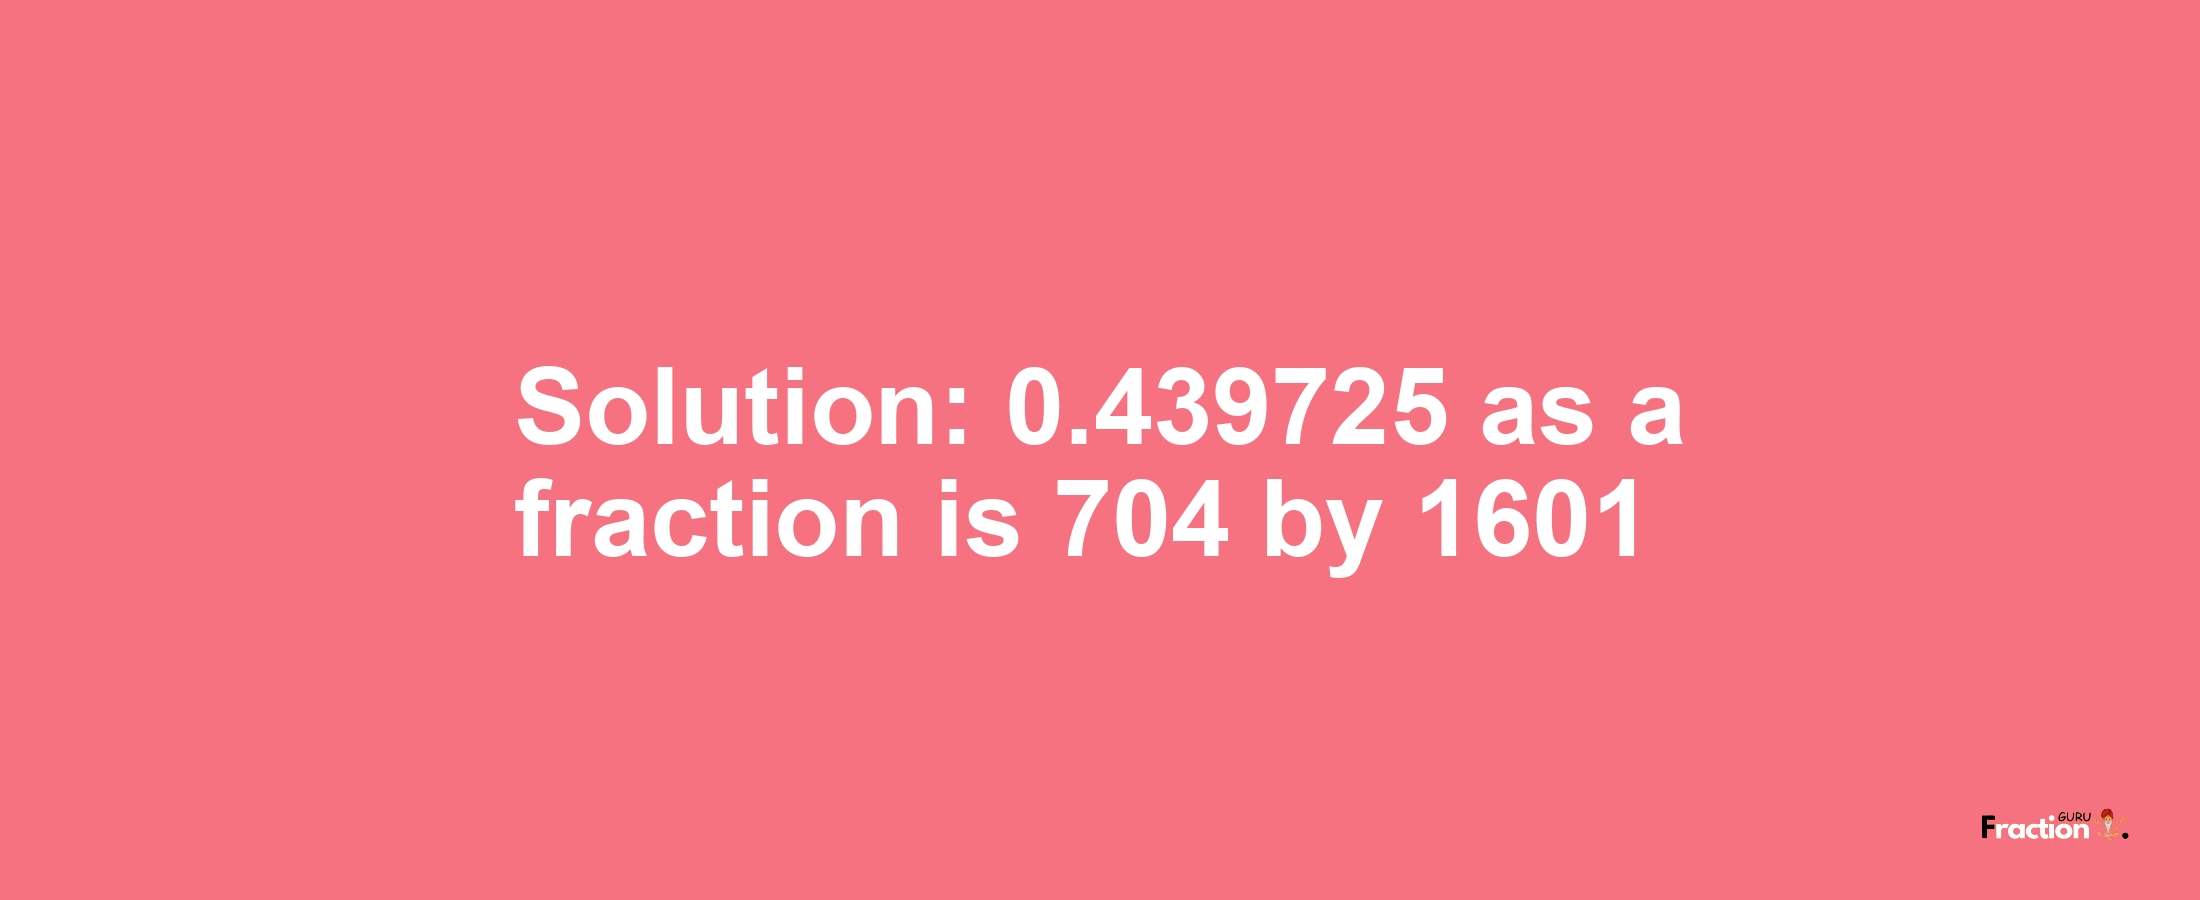 Solution:0.439725 as a fraction is 704/1601